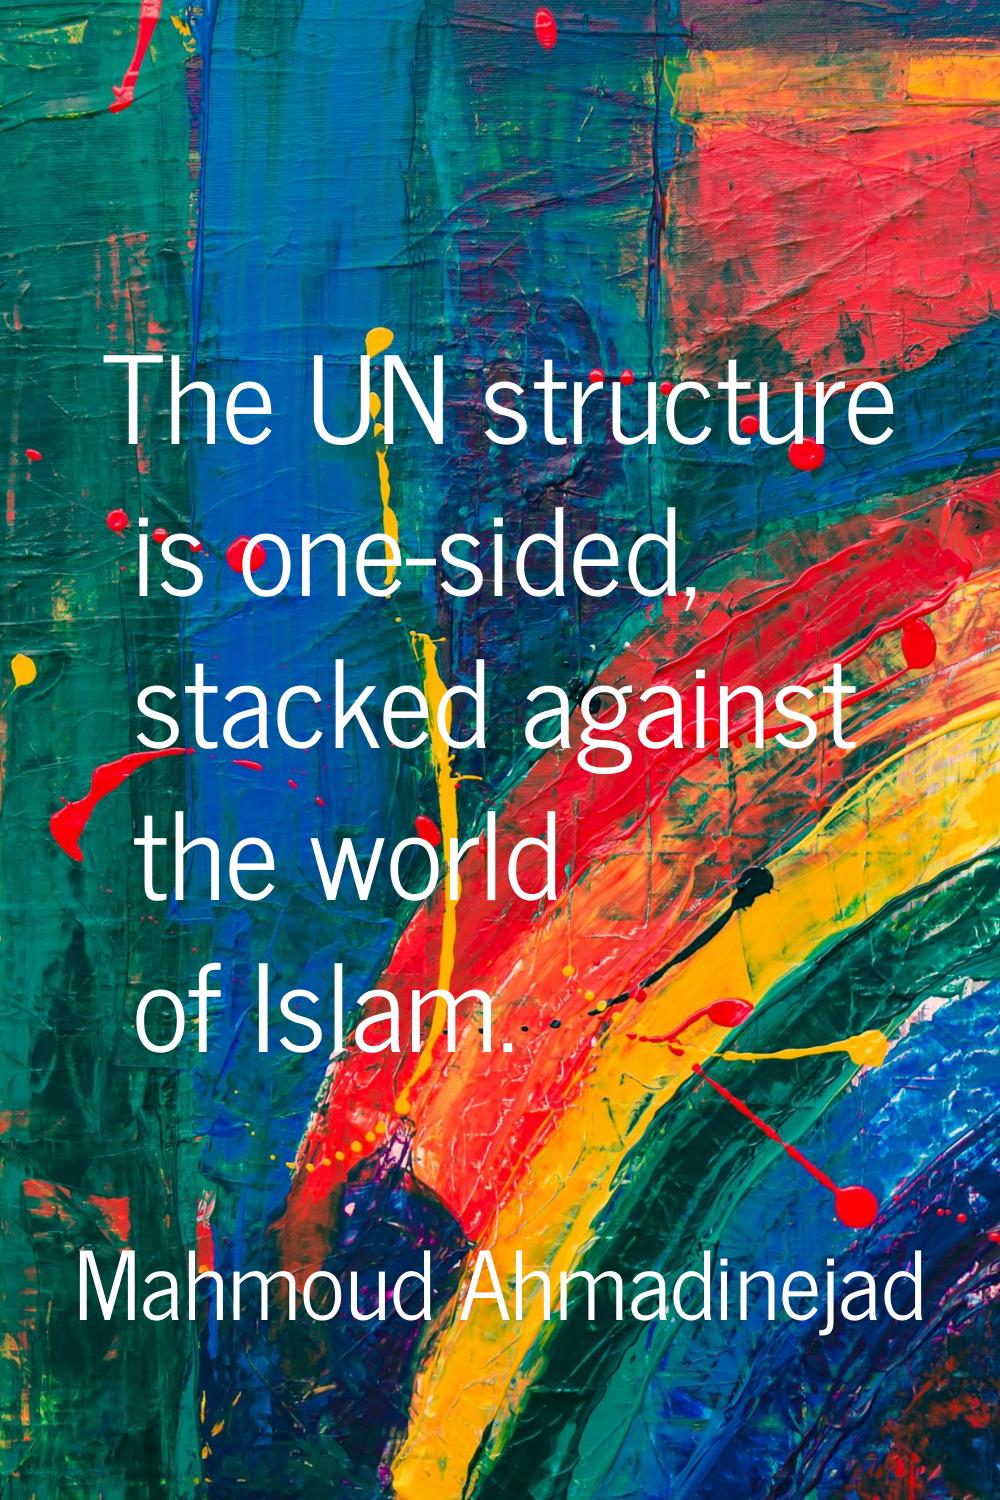 The UN structure is one-sided, stacked against the world of Islam.